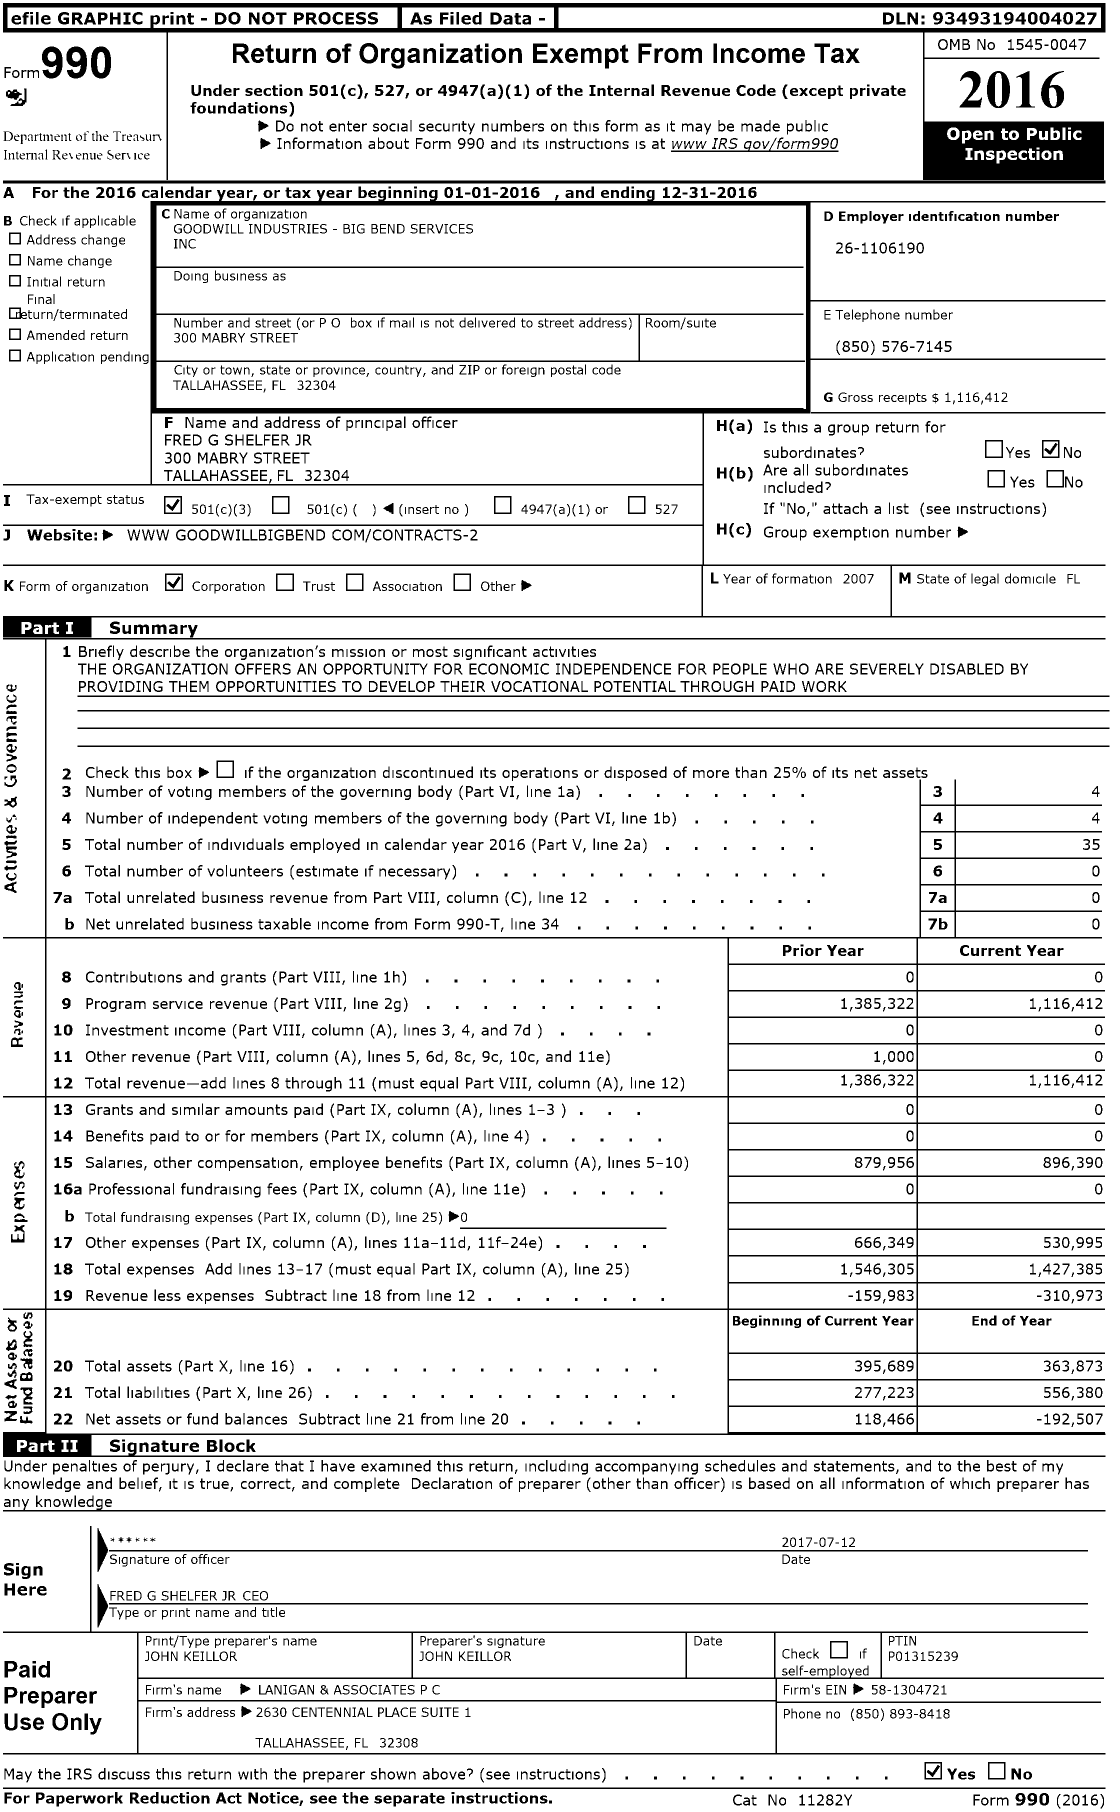 Image of first page of 2016 Form 990 for Goodwill Industries - Big Bend Services